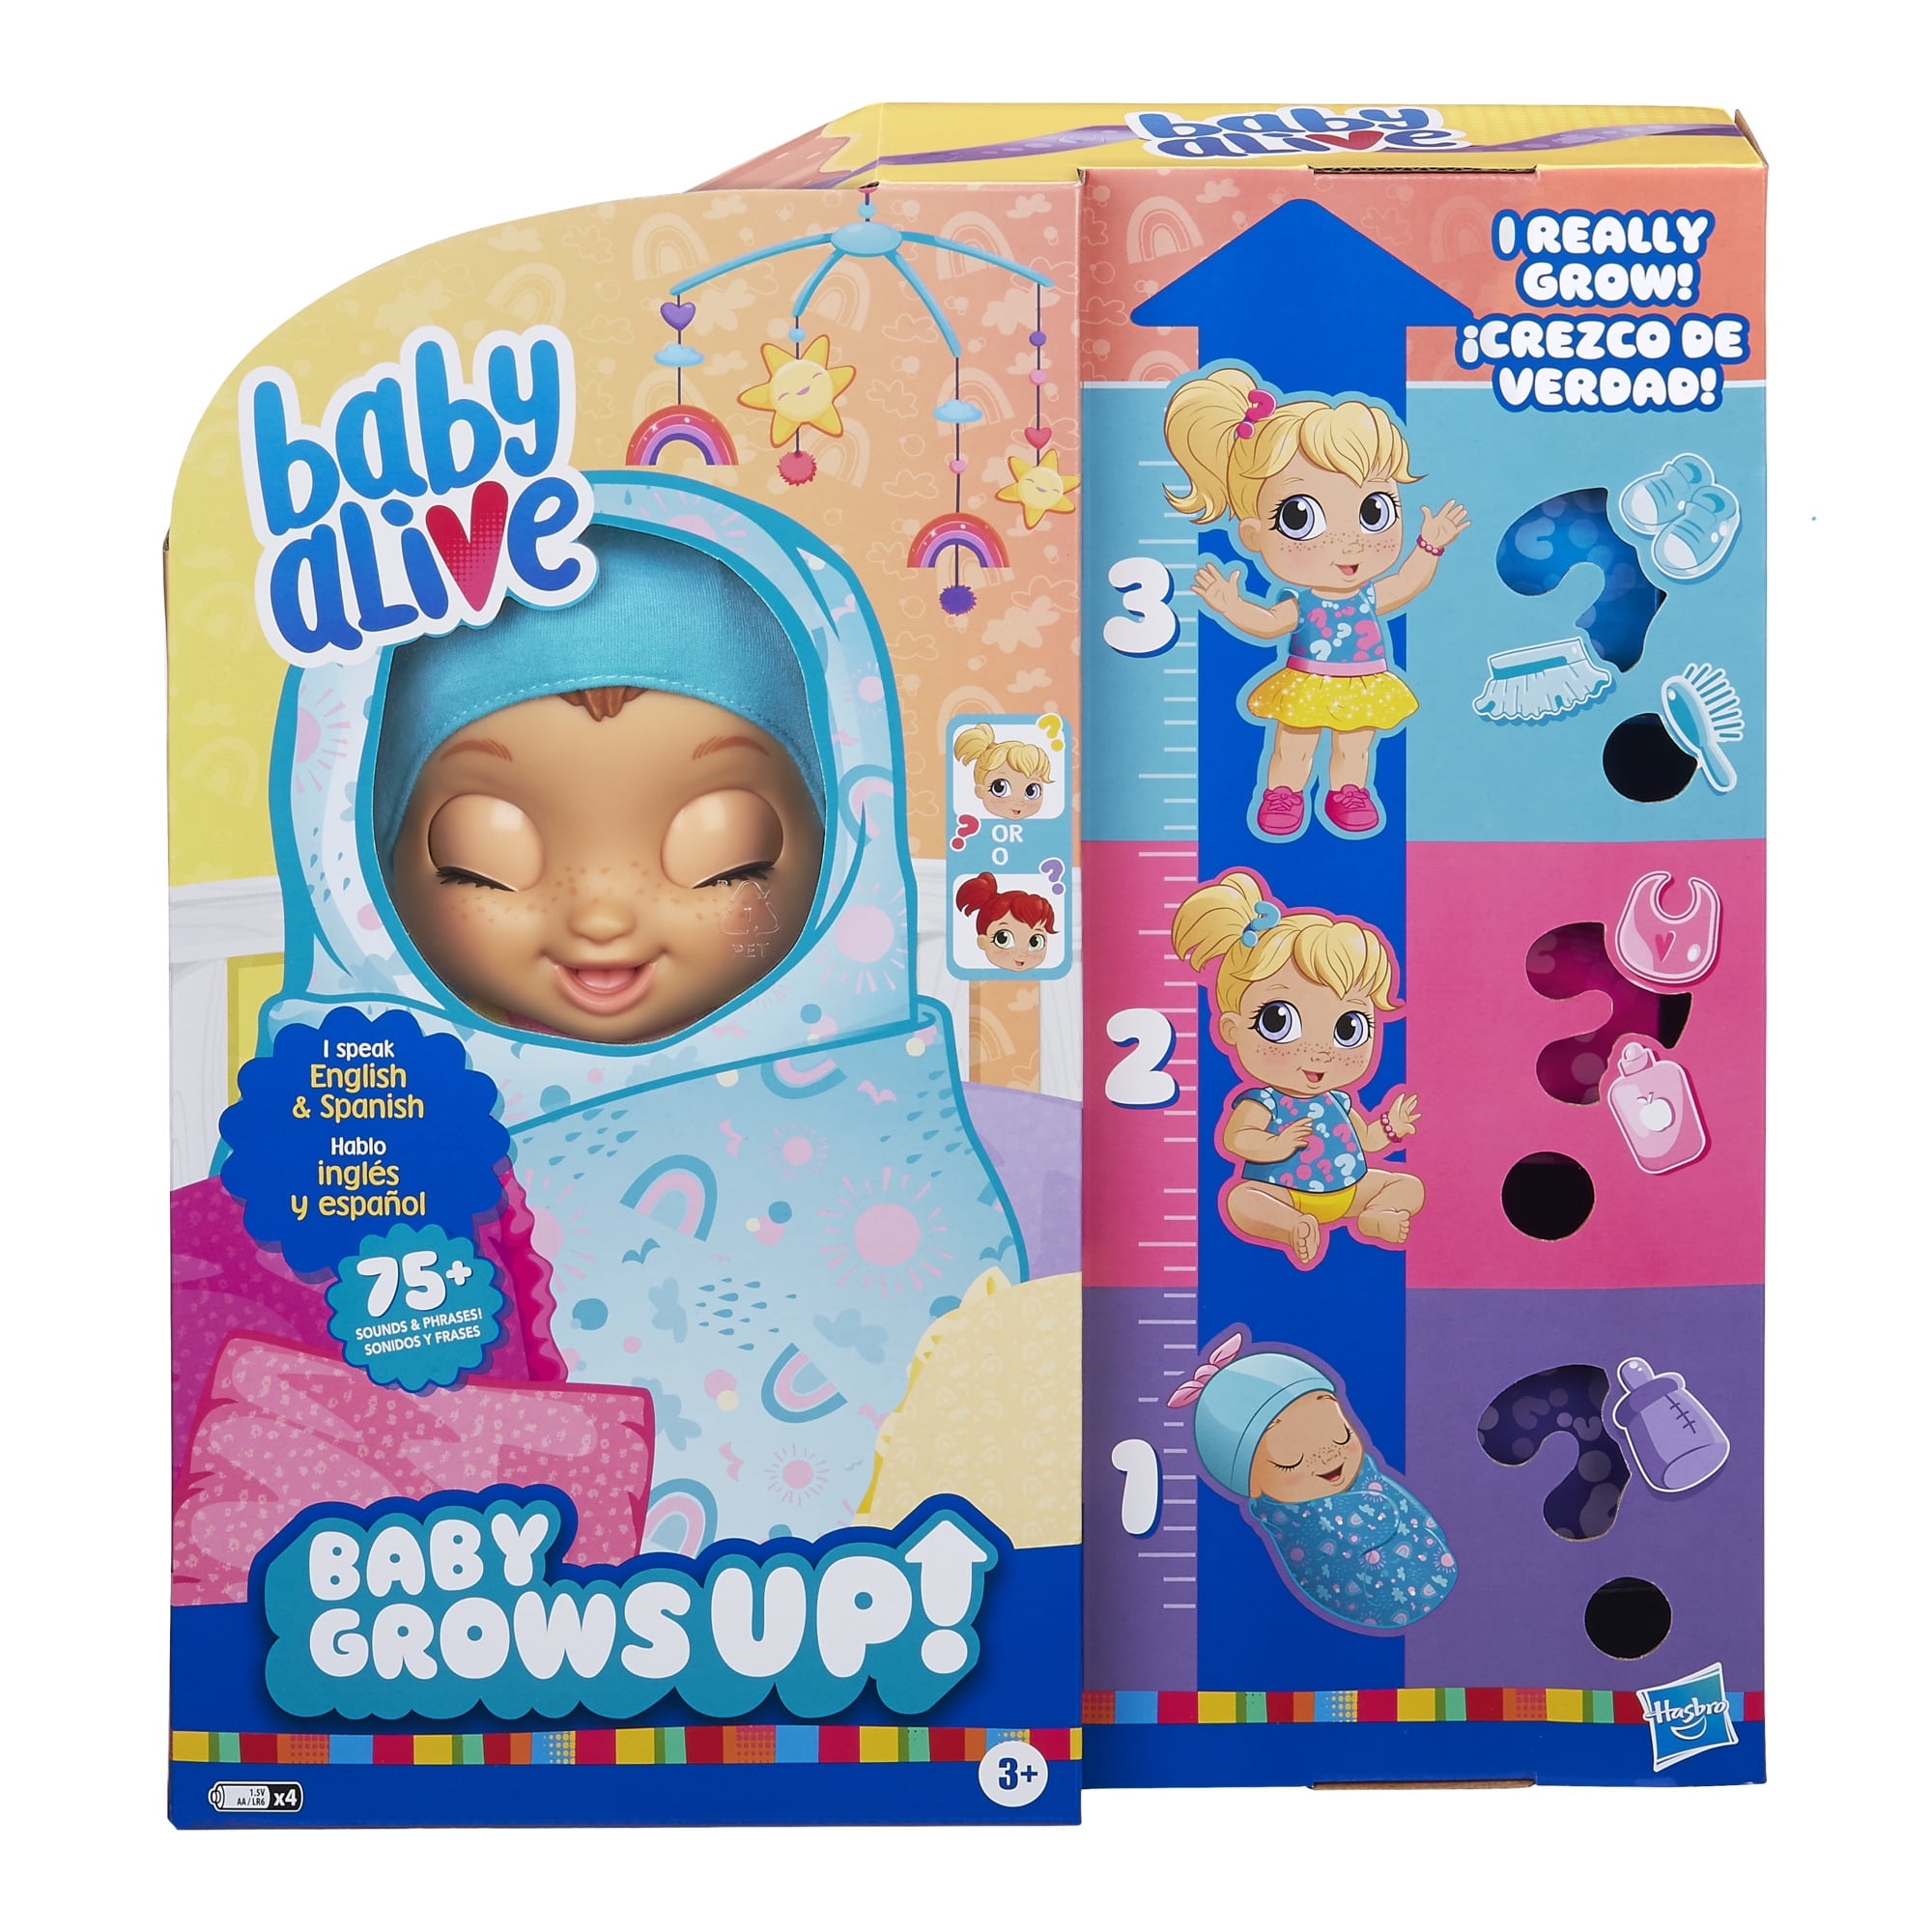 Baby Alive Grows Up, and Talking Baby Doll, 1 Surprise Doll, 8 Accessories -